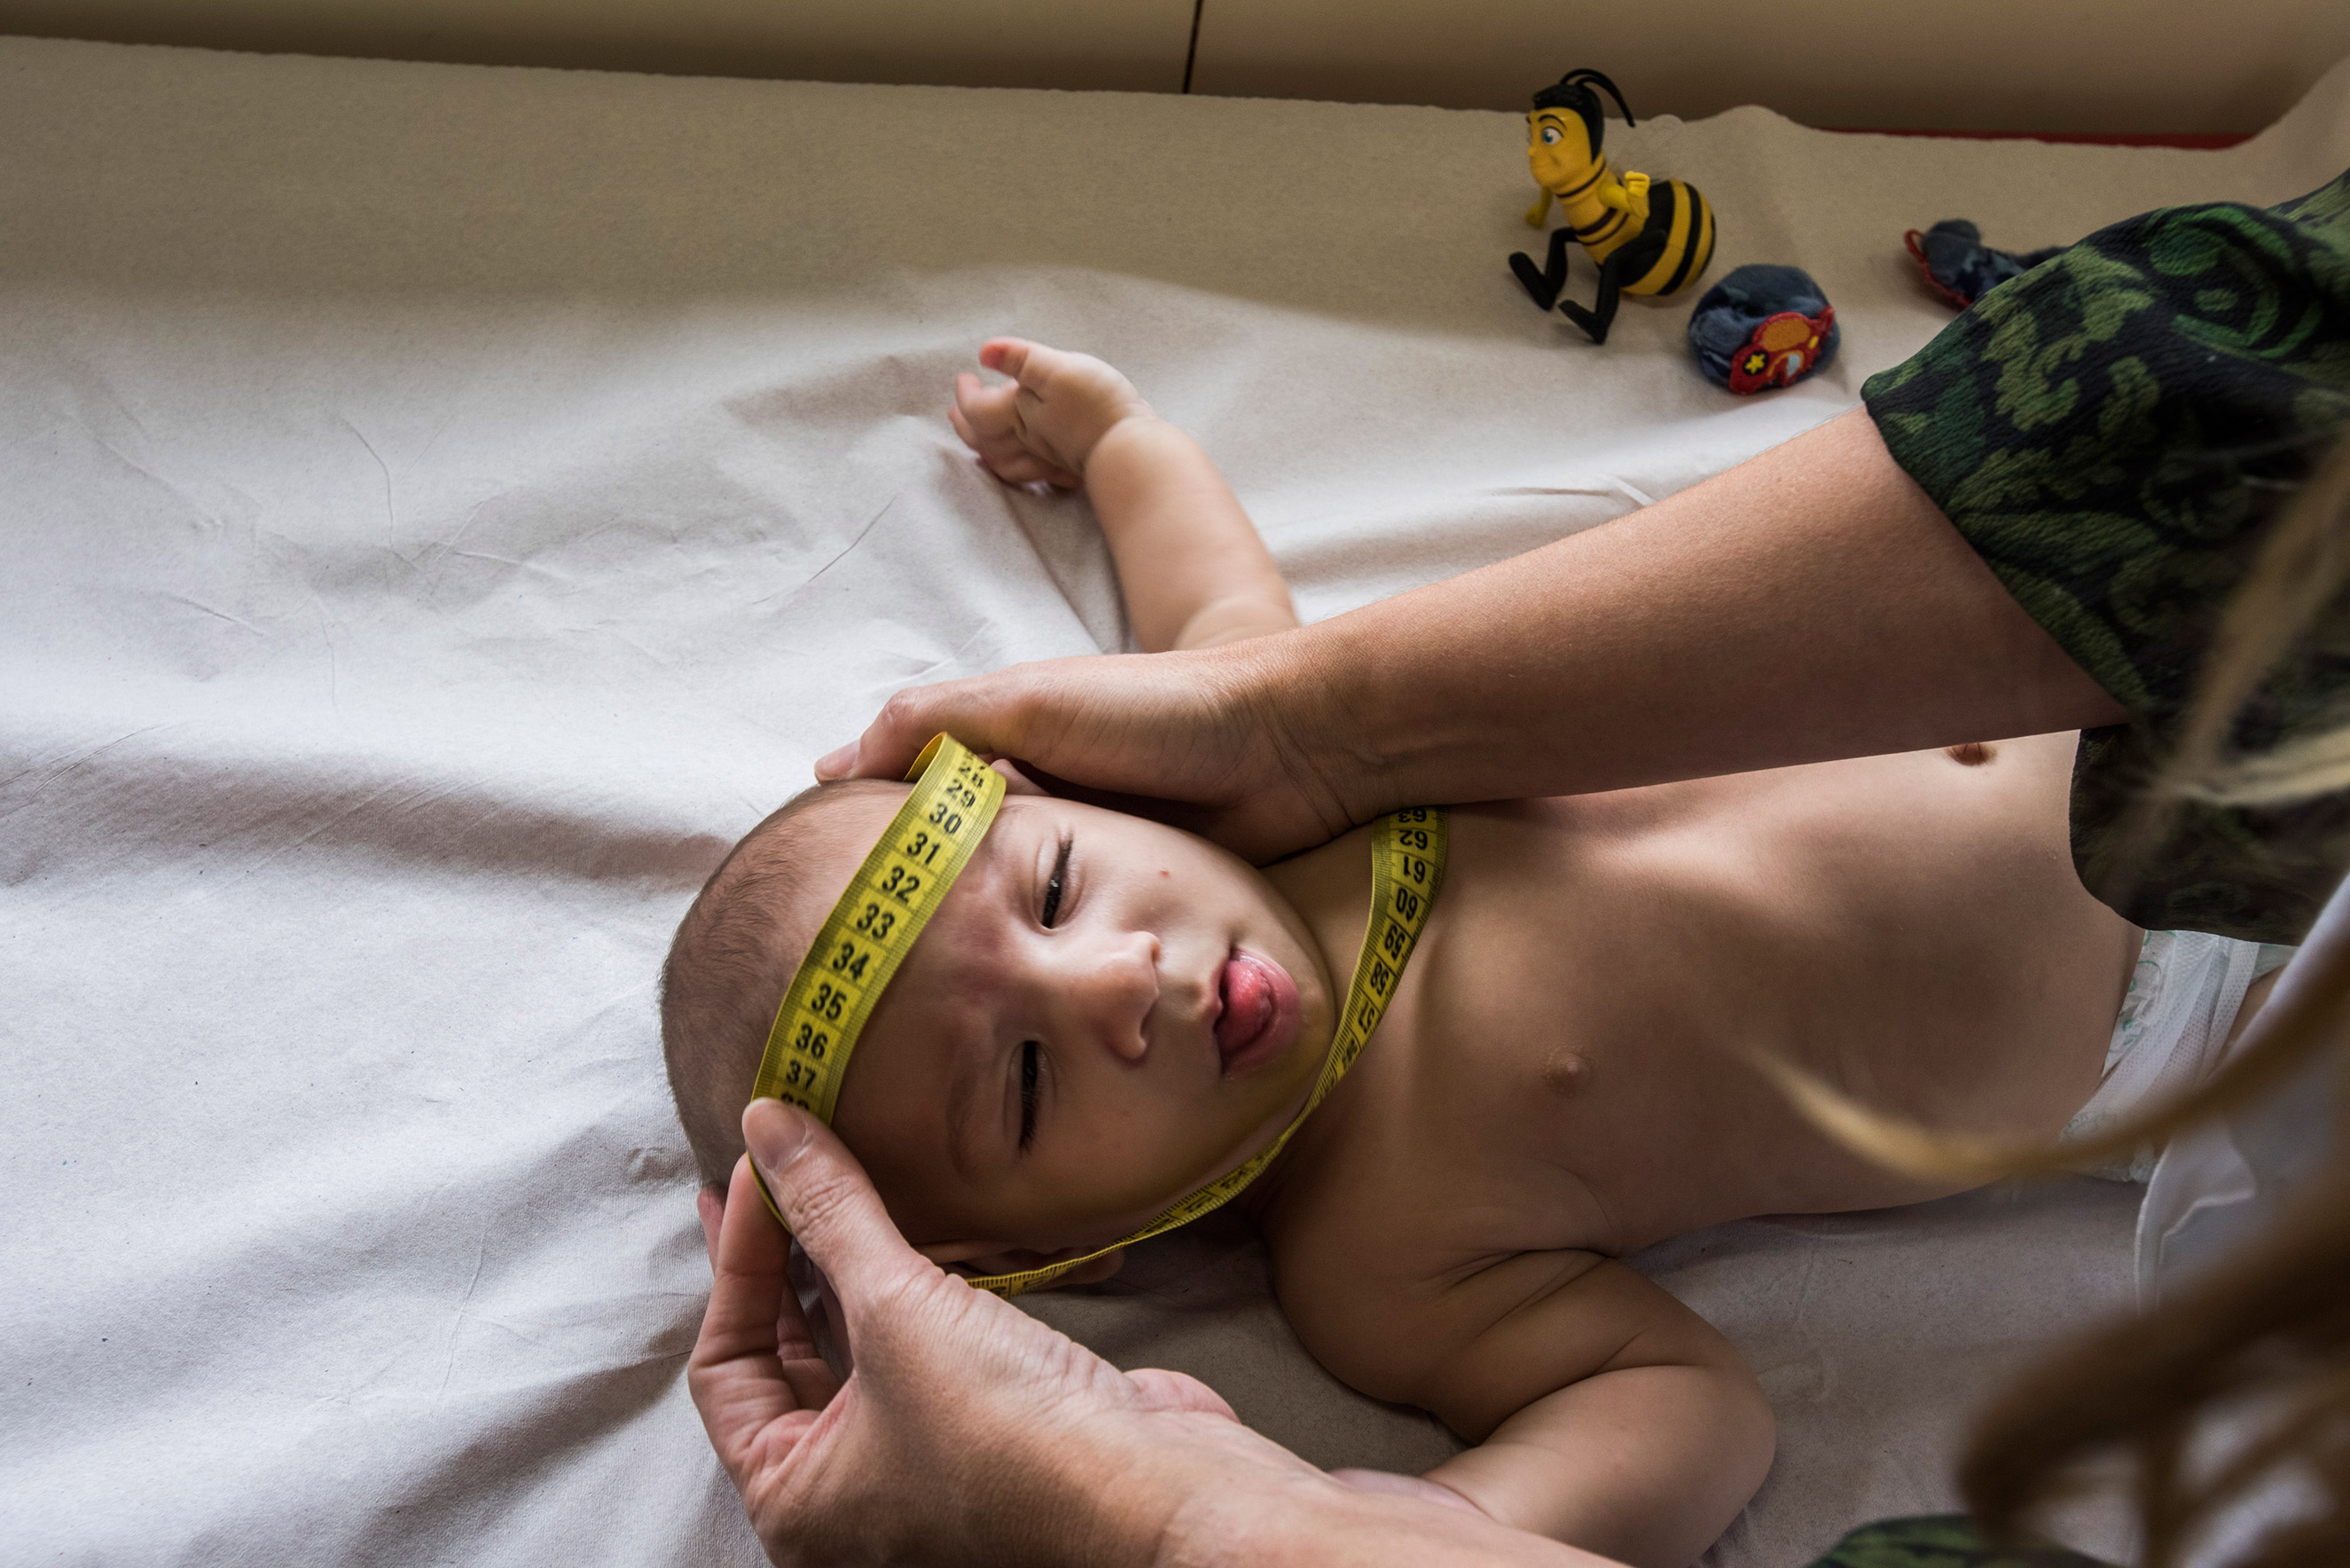 Dr. Vanessa Van Der Linden, a neurologist at the Associacao de Assistencia a Crianca Deficiente, measures the head of a baby with microcephaly in Recife, Brazil, Feb. 1, 2016. This center has seen 69 children with microcephaly so far. (Sebastian Liste—NOOR for TIME)